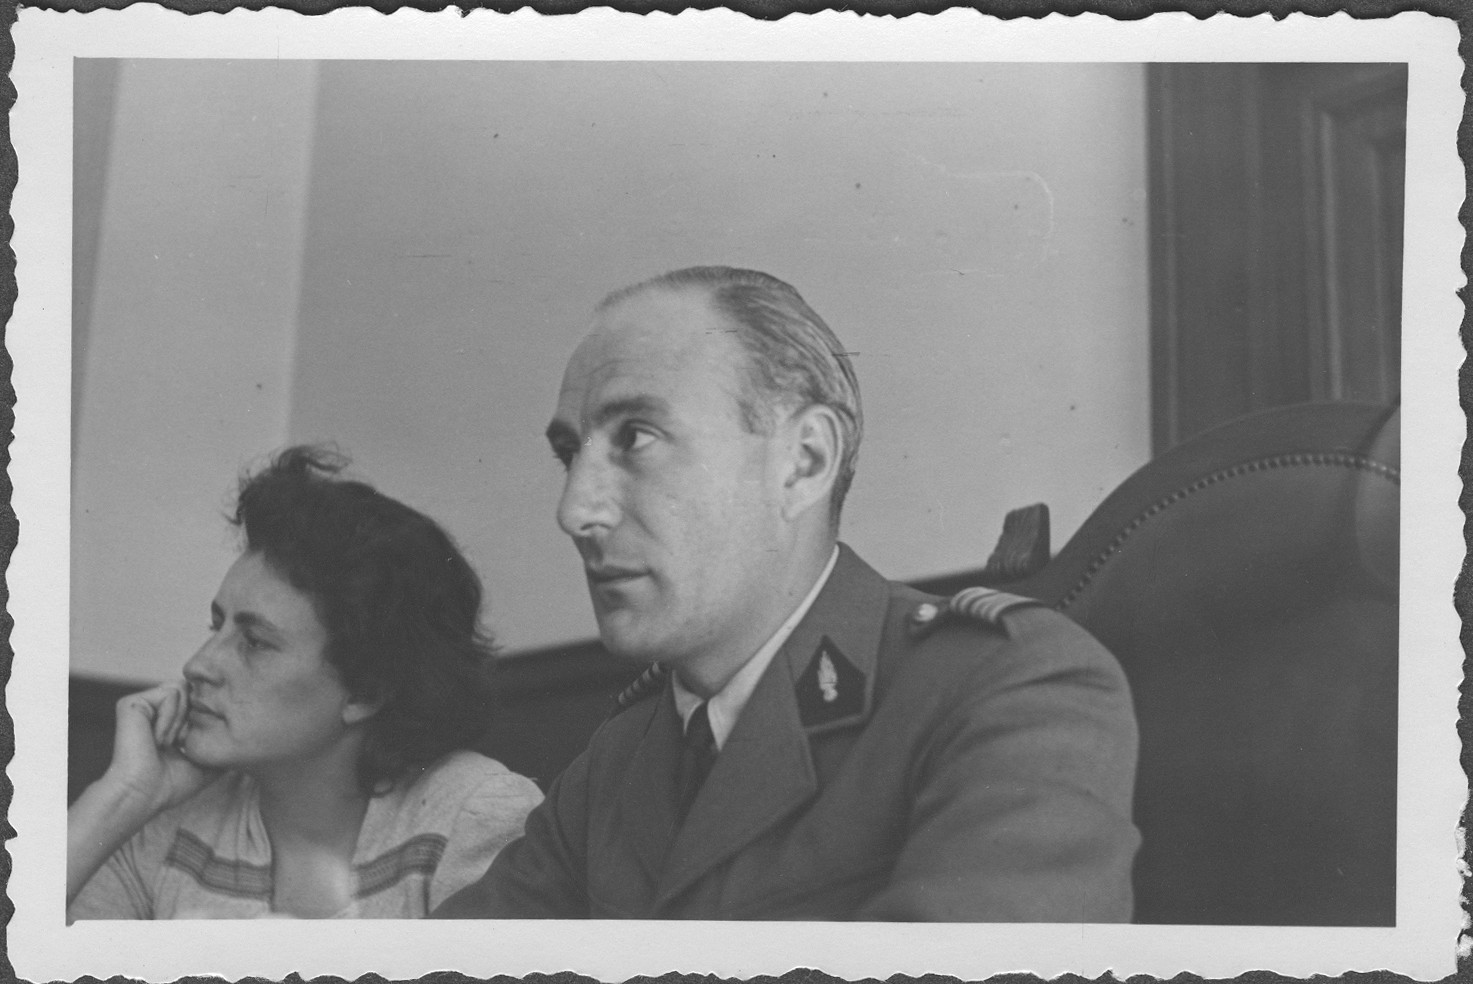 French Commissioner Colonel A. Martin-Havard listens to testimony at the IMT Nuremberg commission hearings investigating indicted Nazi organizations.  

Seated at the left is the commissioner's interpreter.